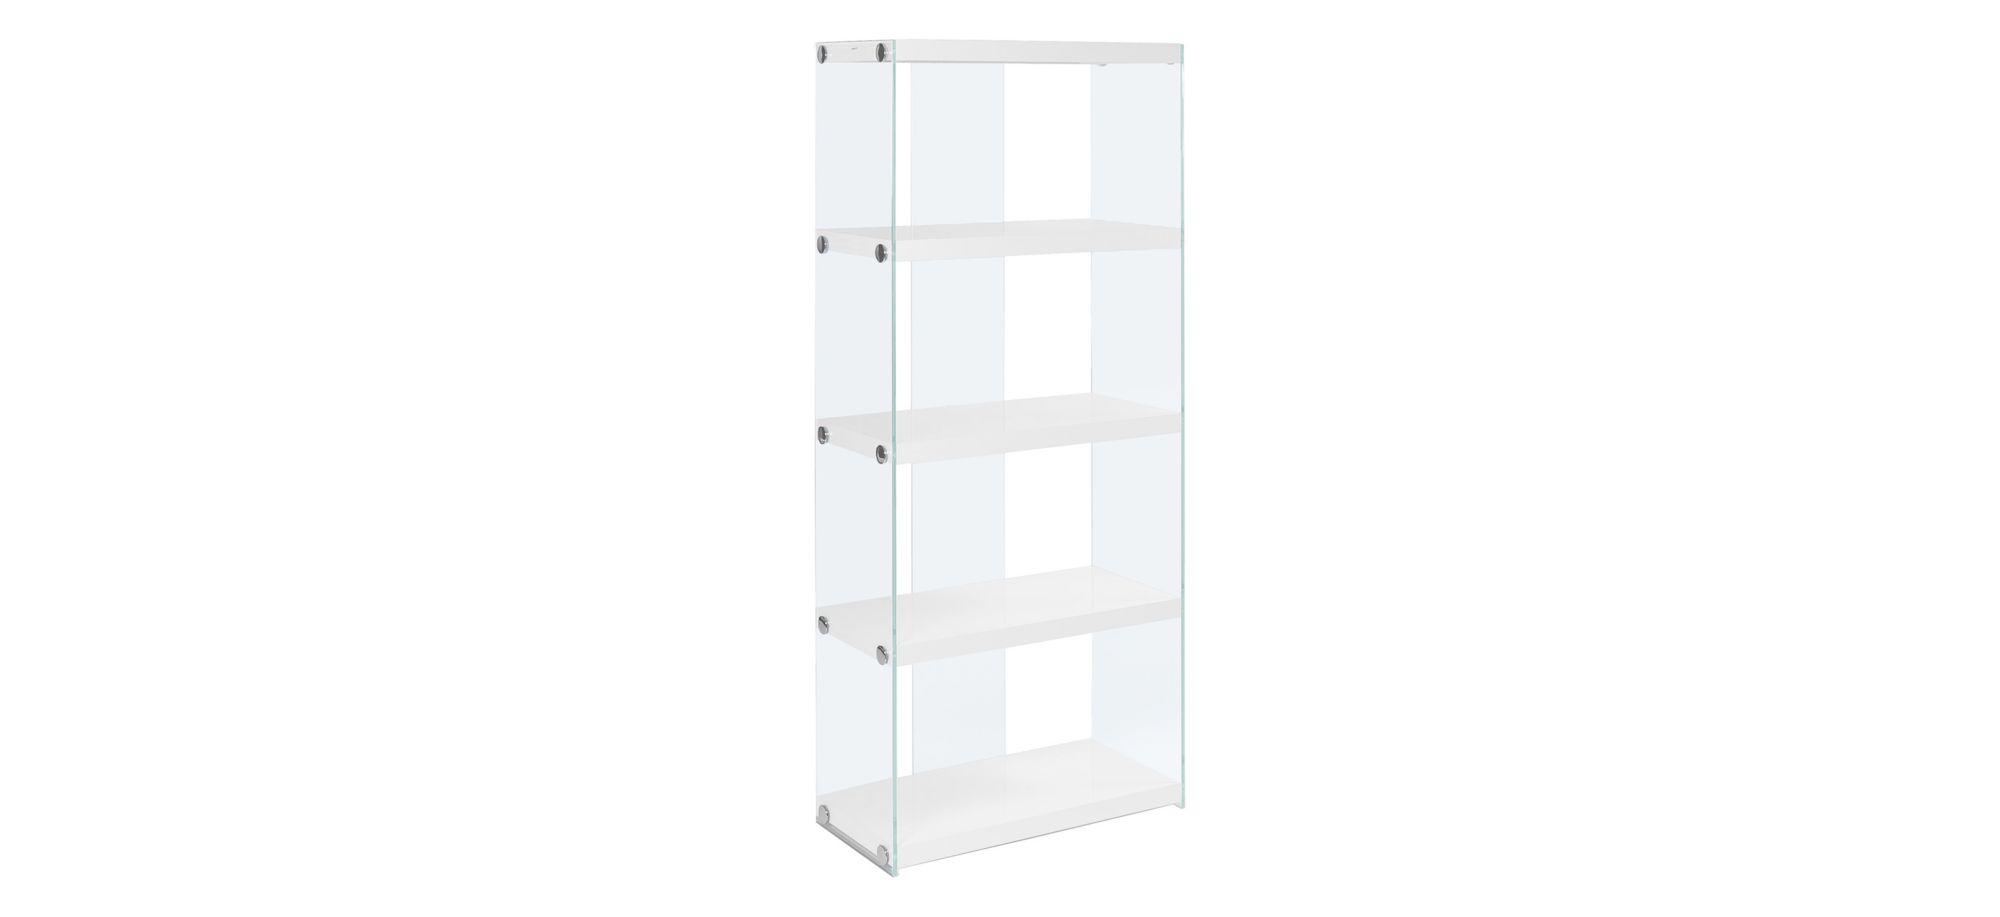 Monarch Tempered Glass 60" Bookcase in White by Monarch Specialties